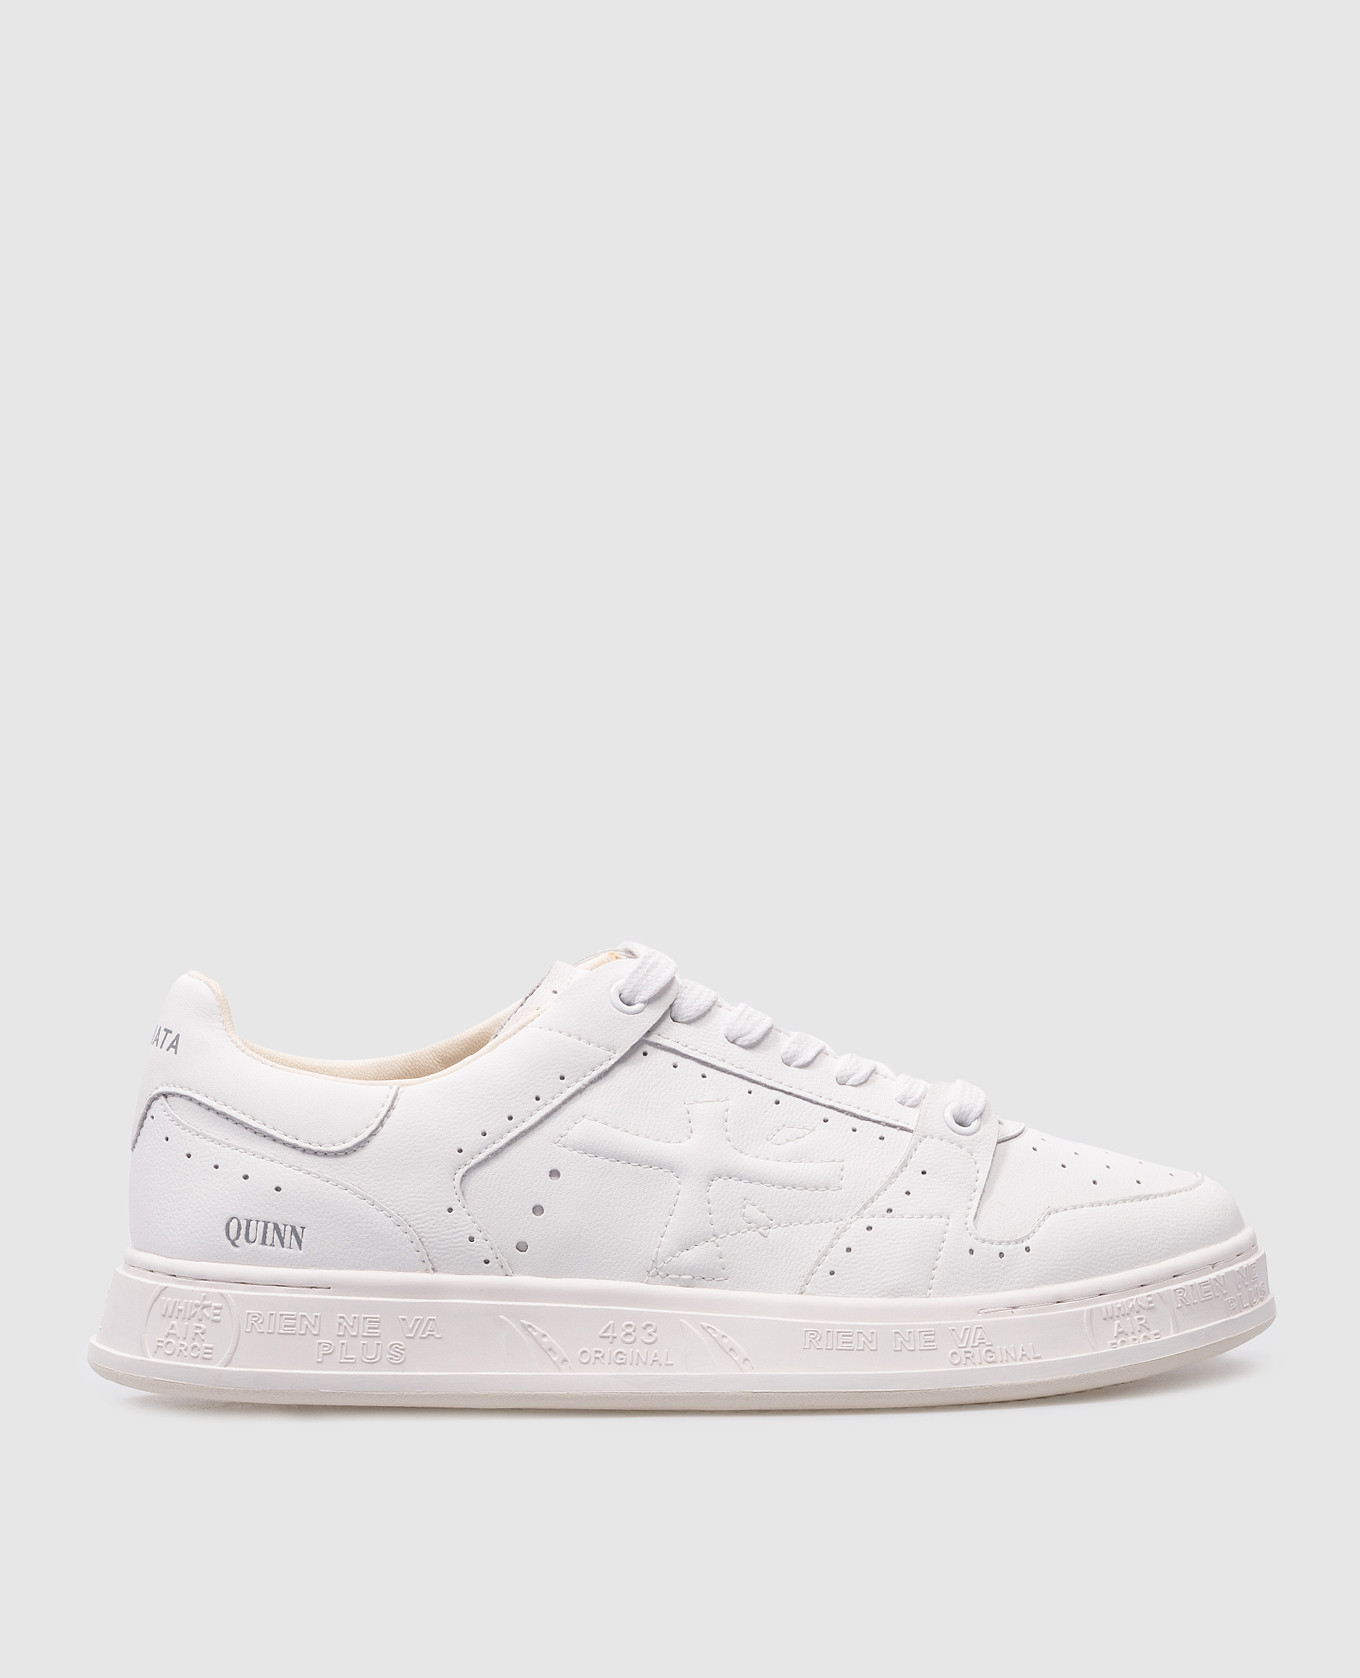 White leather QUINN sneakers